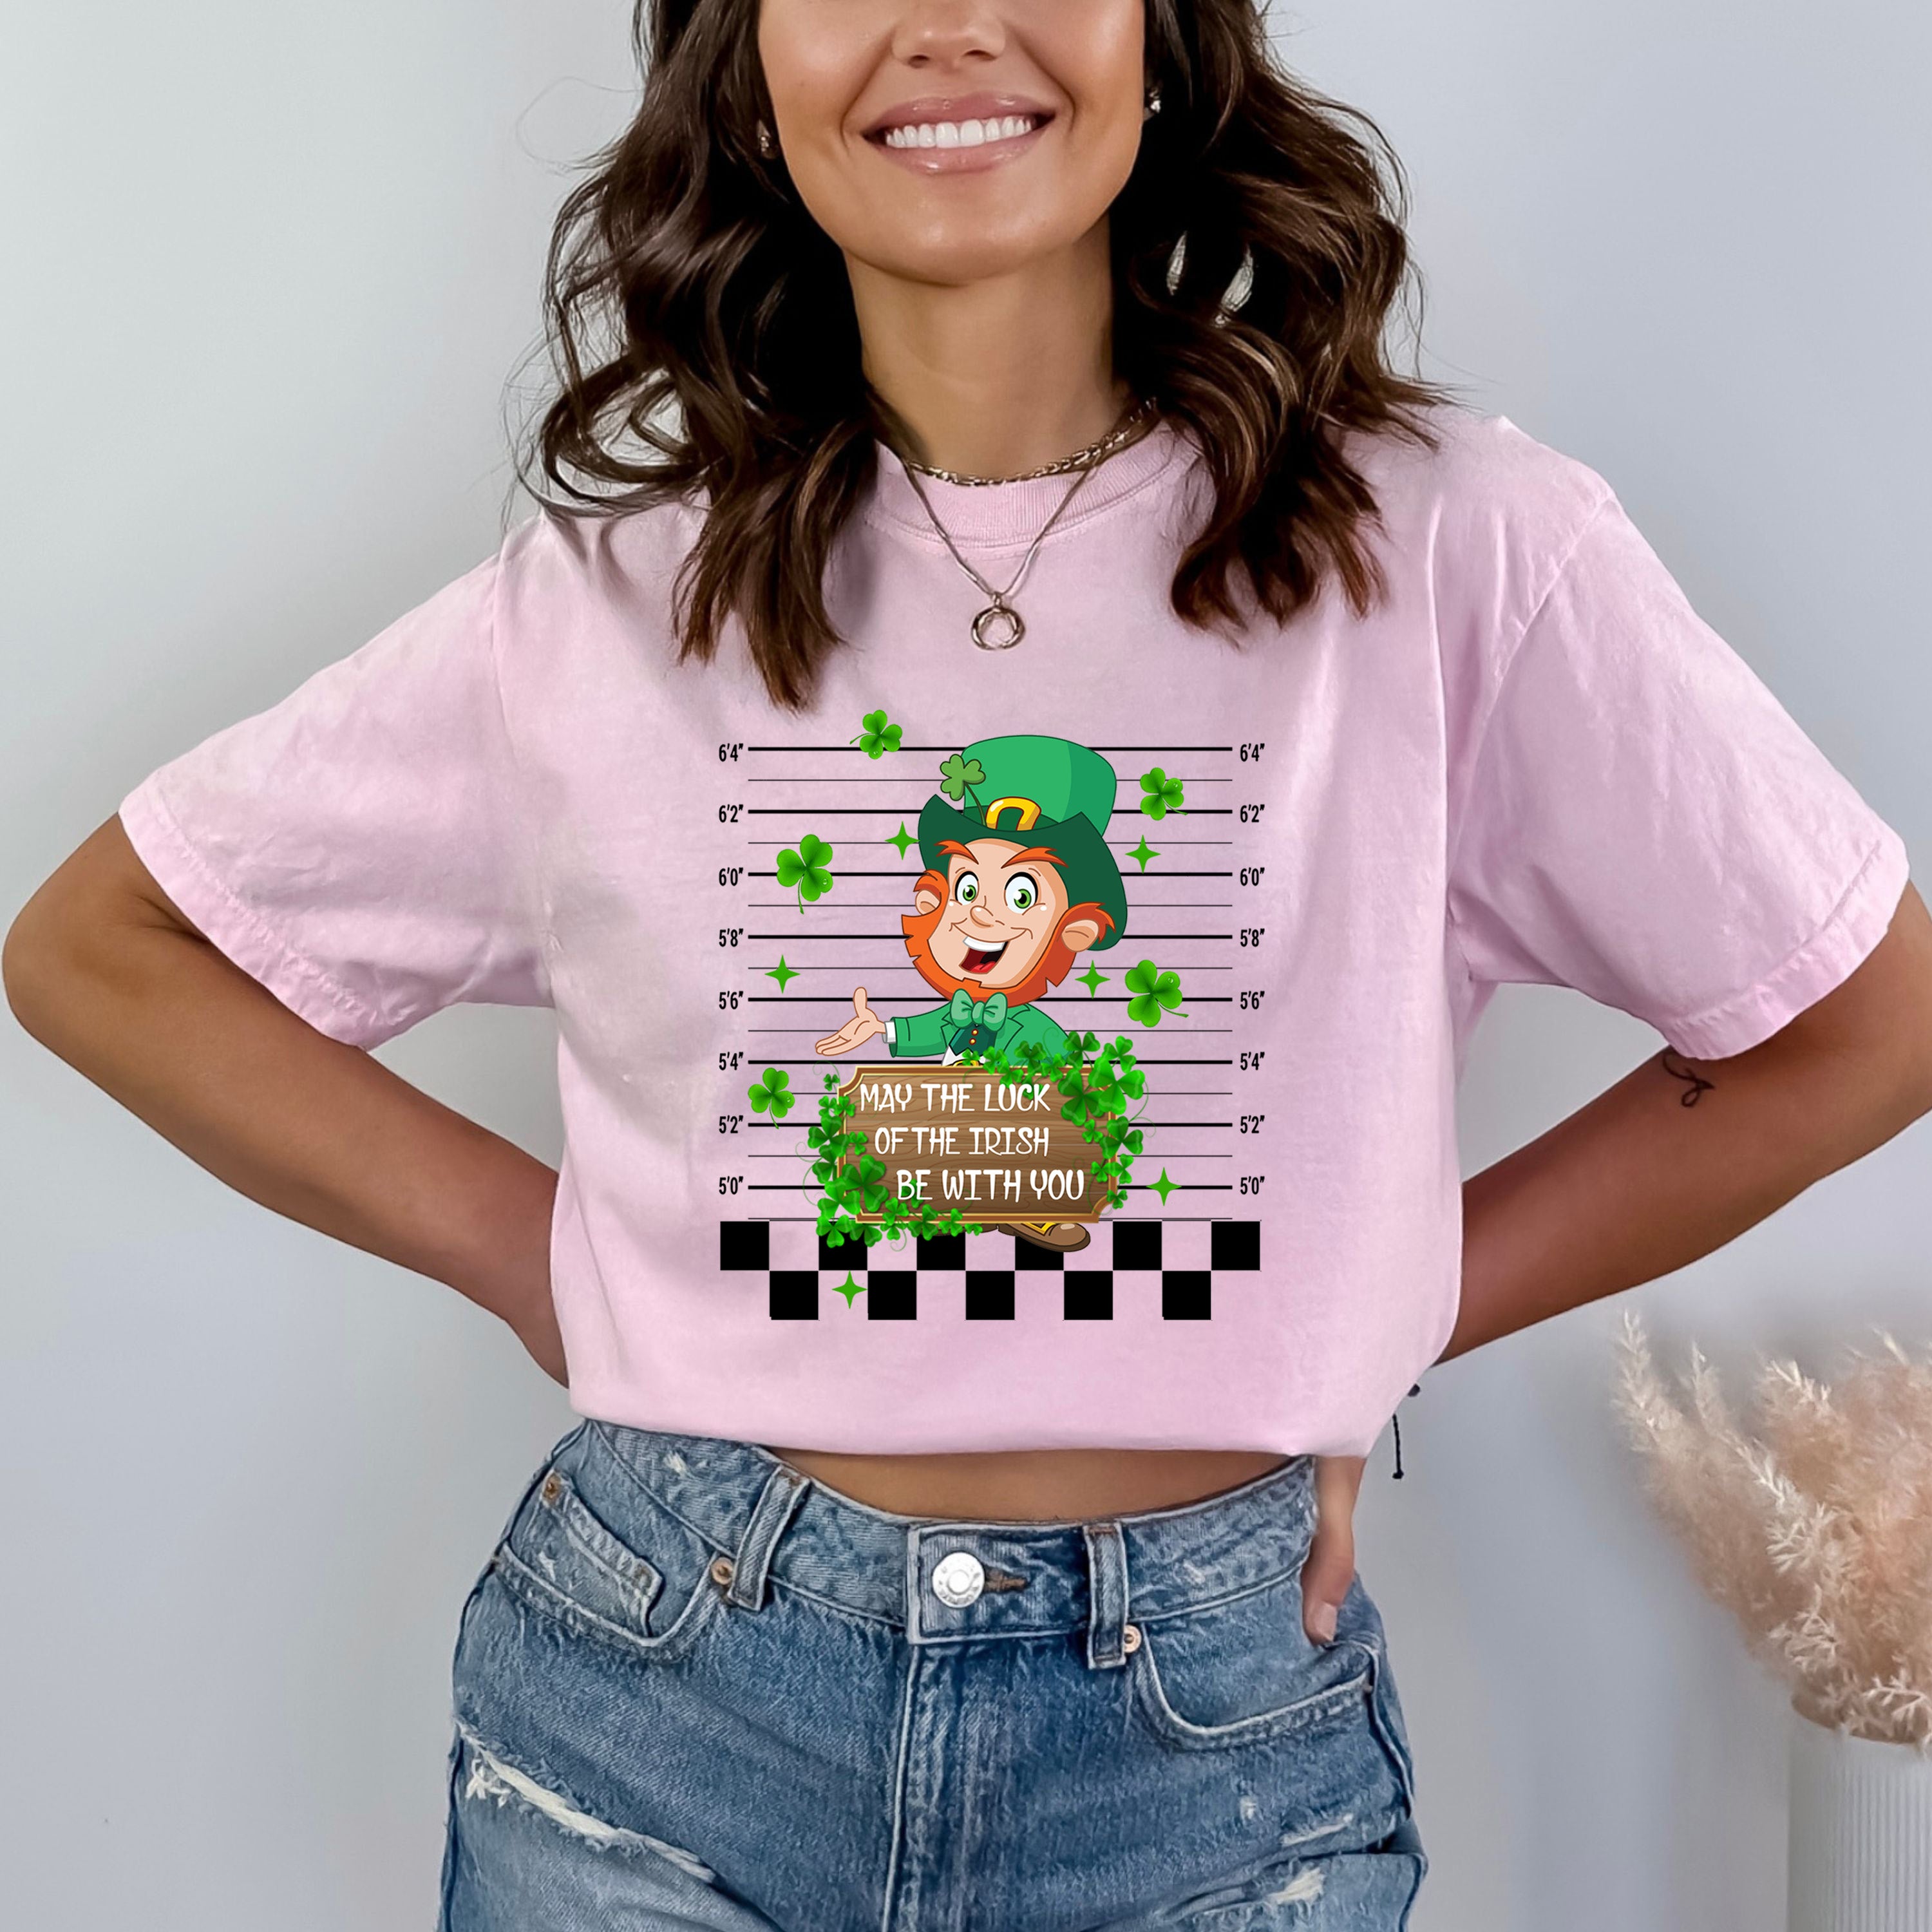 May The Luck Of Irish With You - Bella canvas